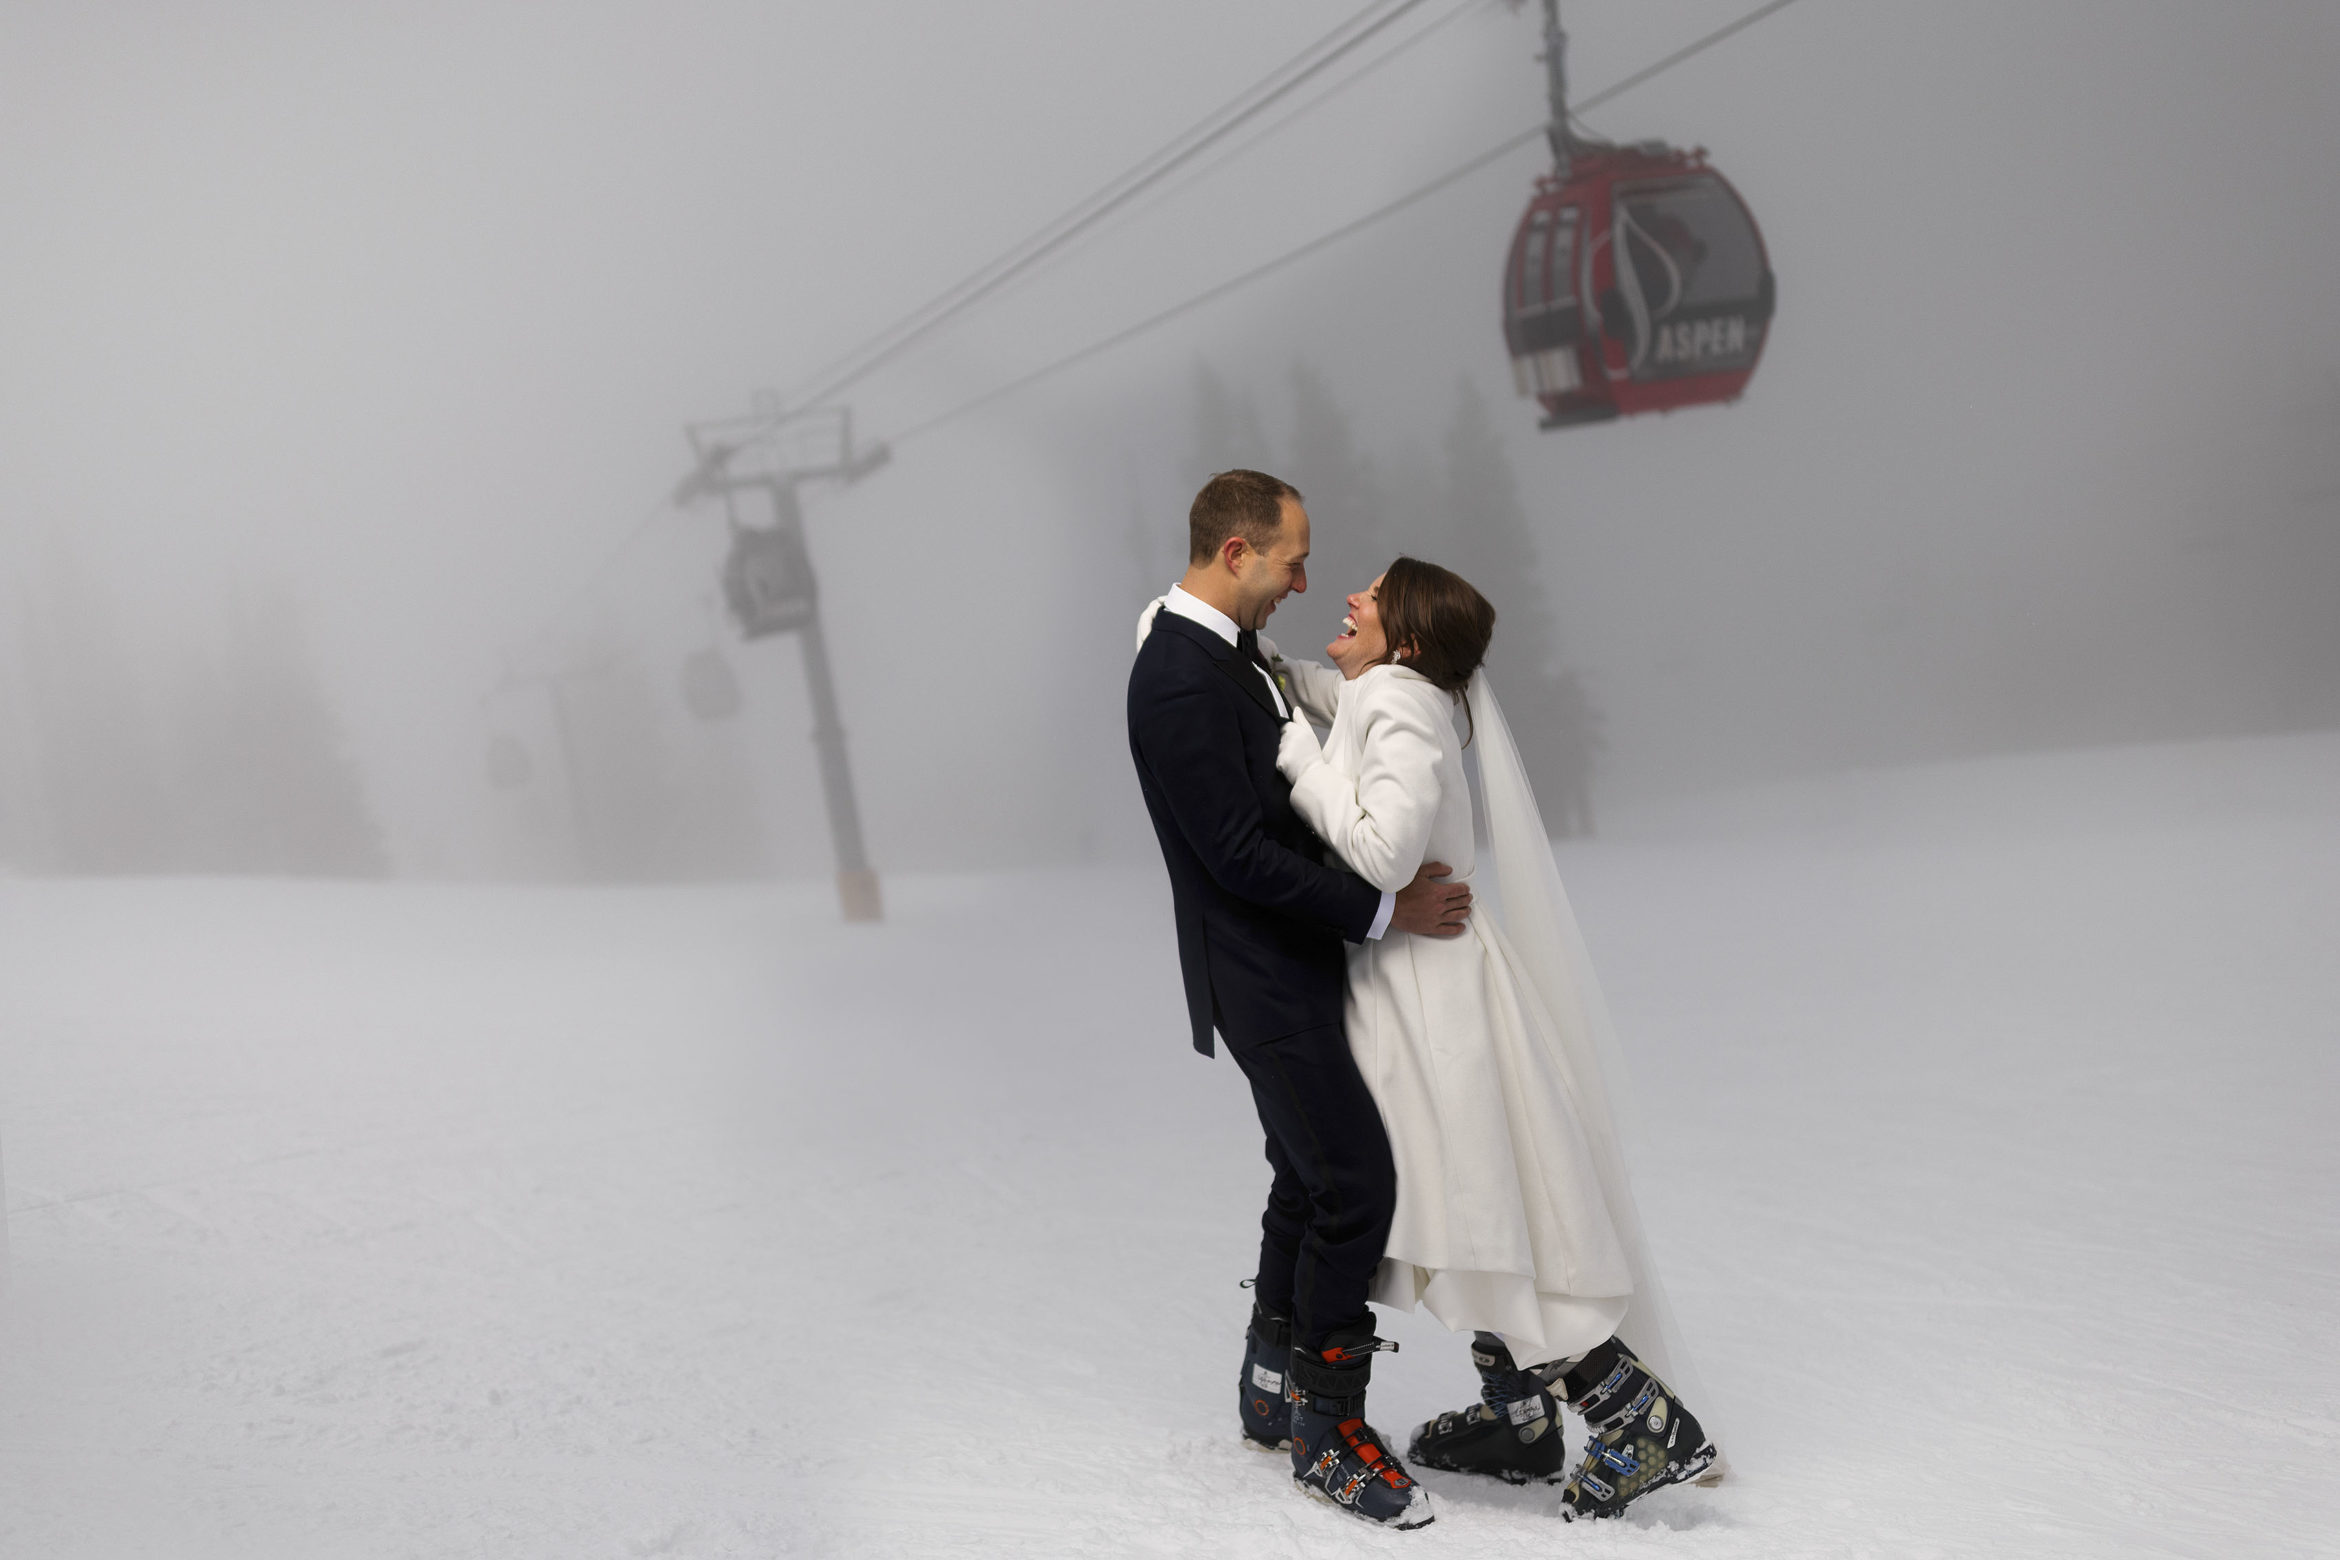 The bride and groom share a laugh while posing for a portrait as the fog rolls in on Aspen mountain following their micro wedding ceremony